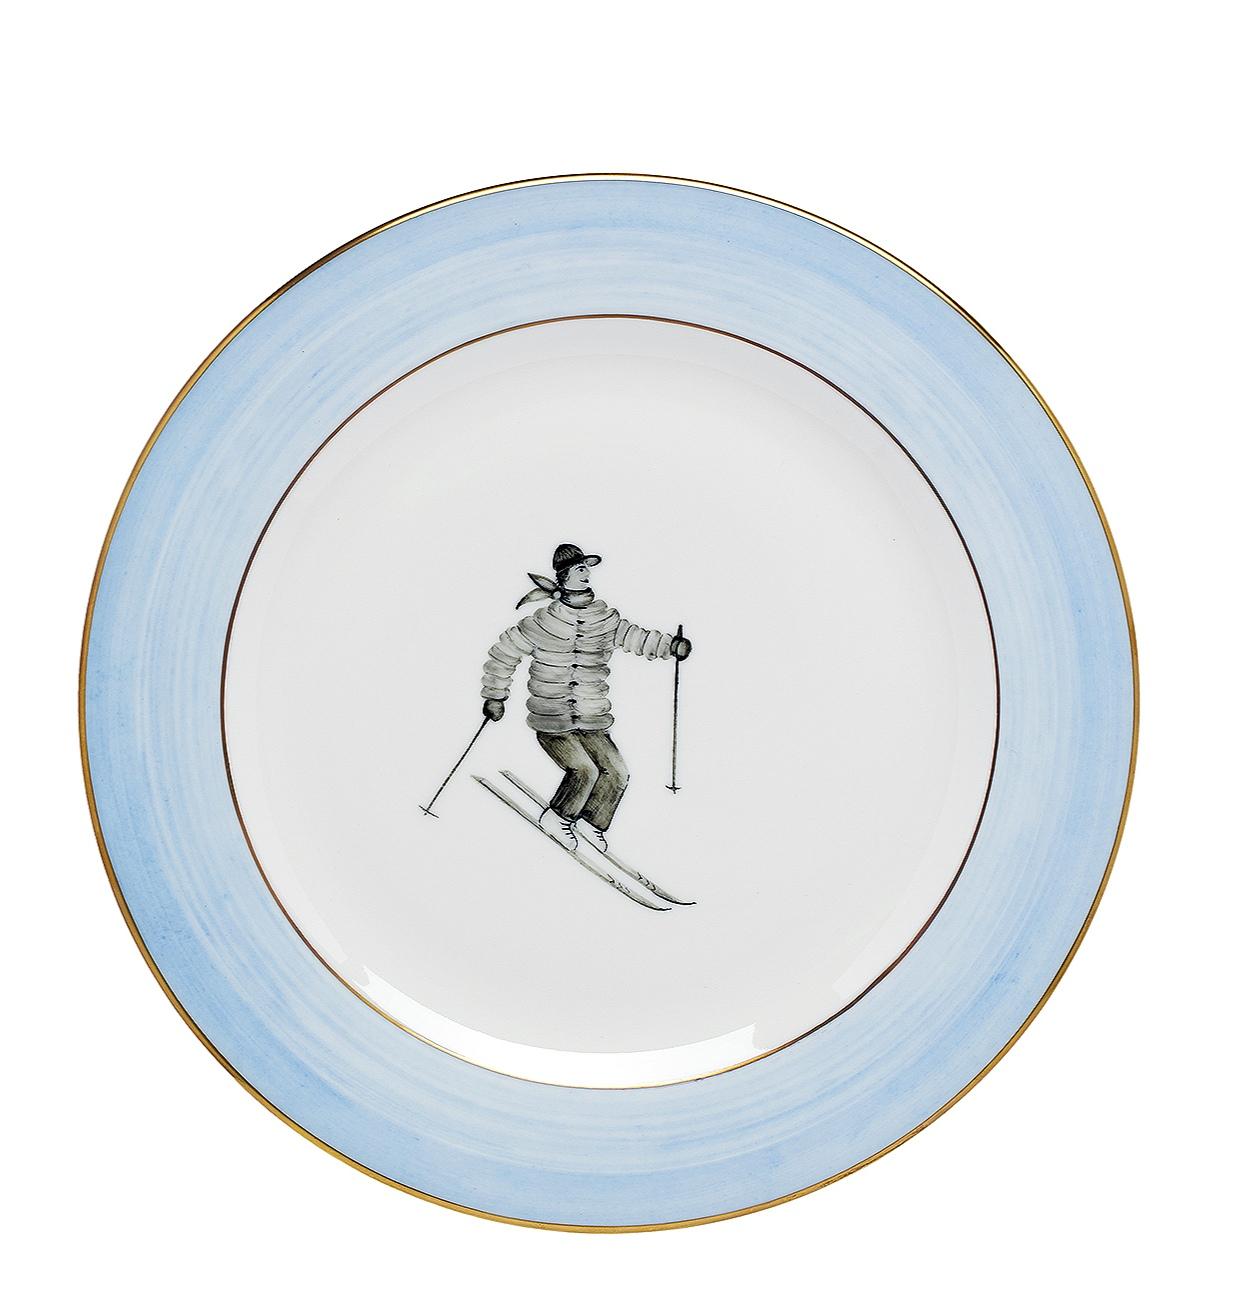 Set of six completely handmade and hand painted under glaze porcelain soup plates. The decor shows a country style grey skier decor with a blue hands free line and 24-carat gold rimmed.
The painting is dishwasher safe but not the platinum line. We